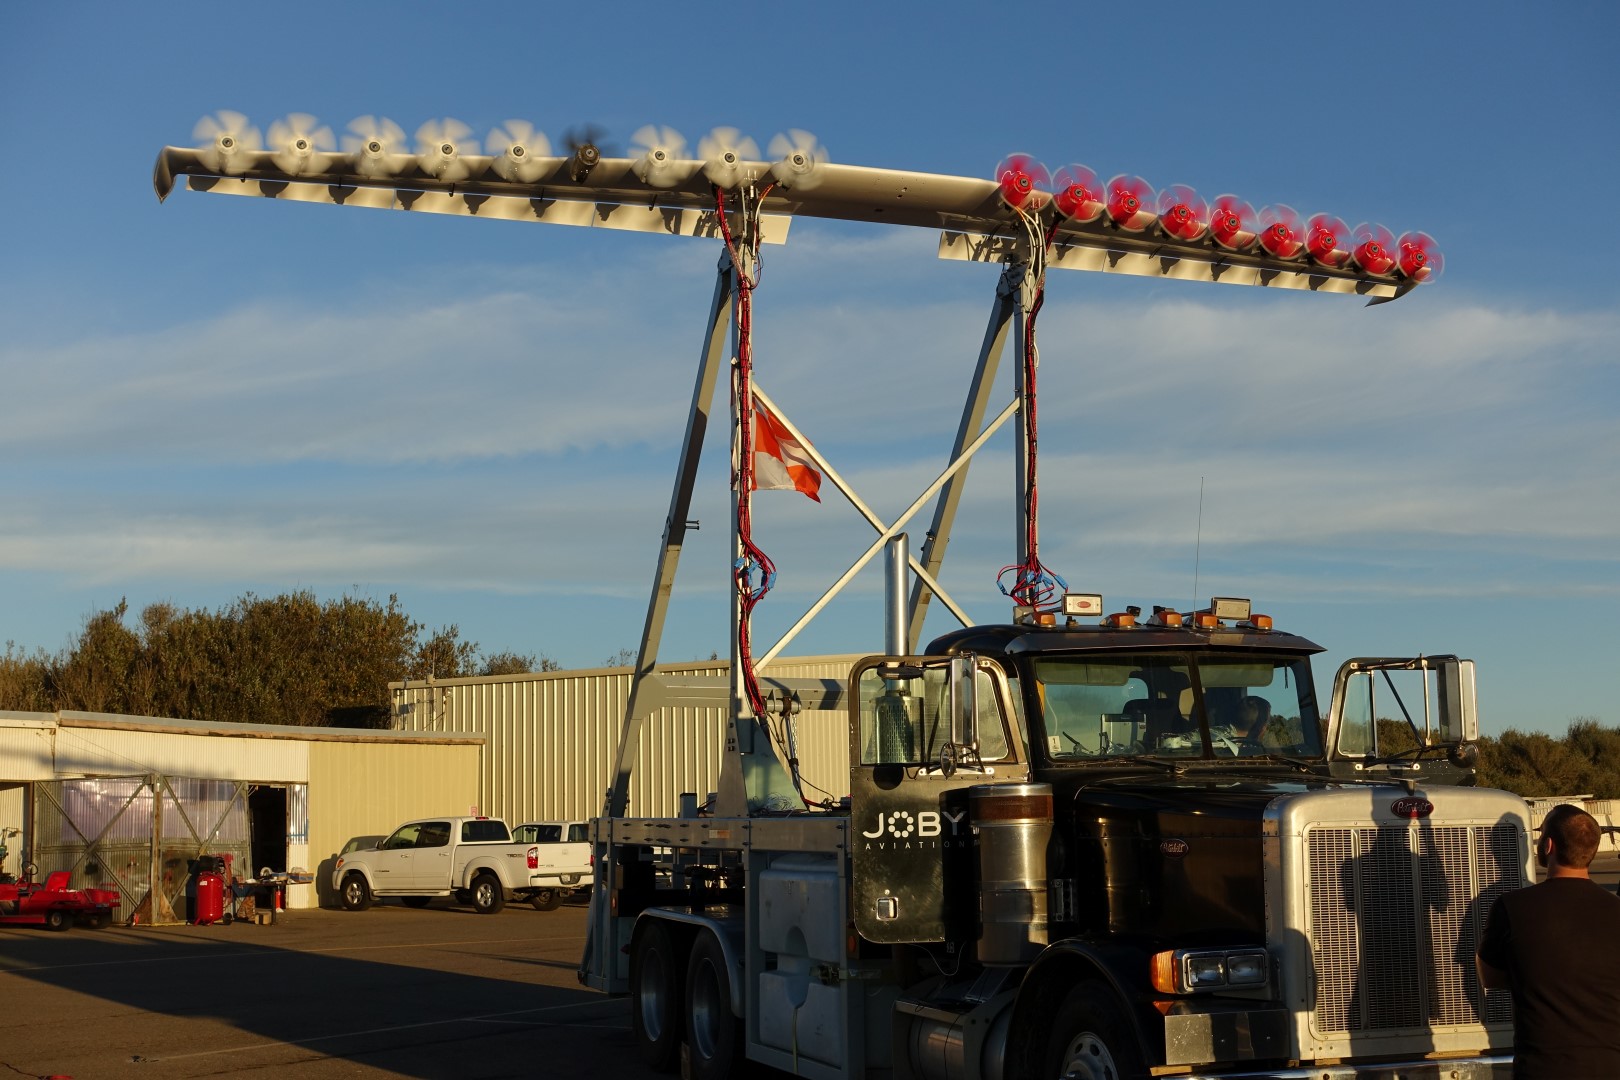 LEAPTech wings mounted on a truck for testing (Credit: Joby Aviation)